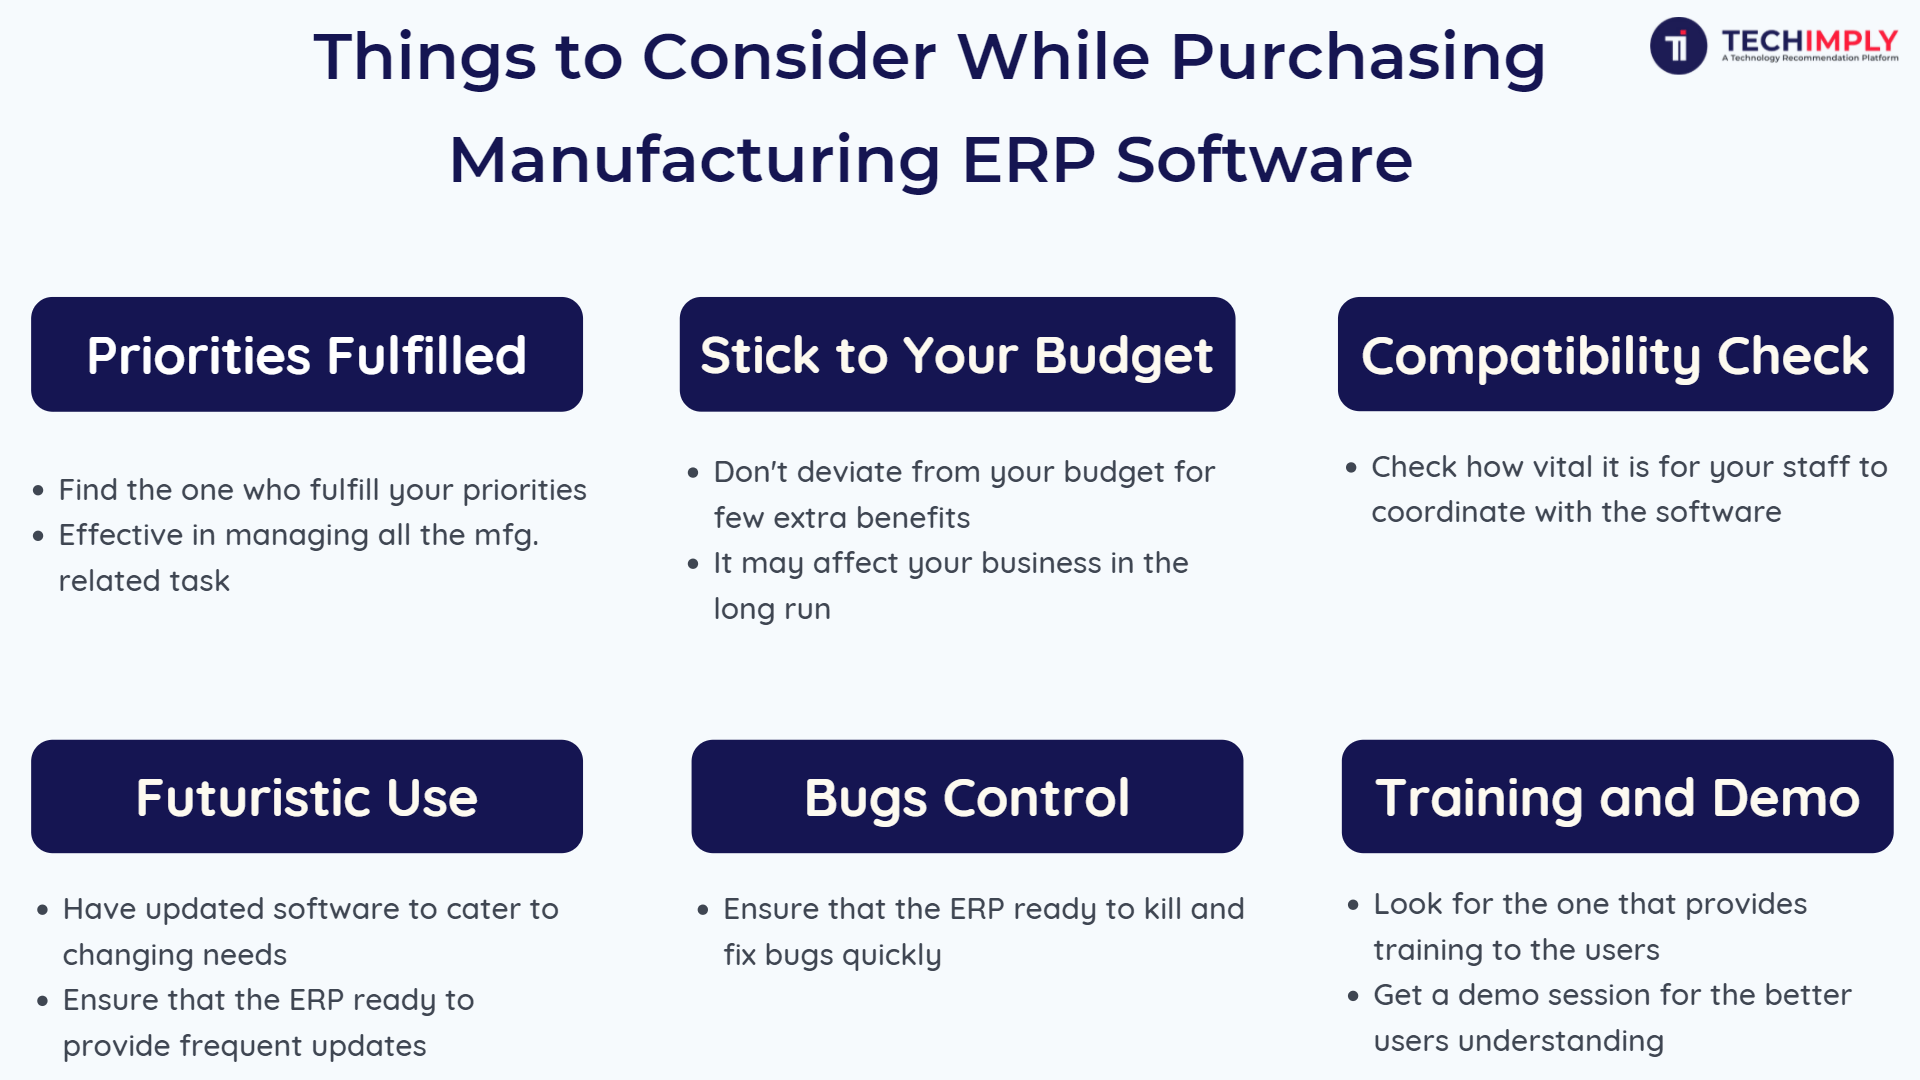 Things to consider while purchase ERP Software for Manufacturing Industries